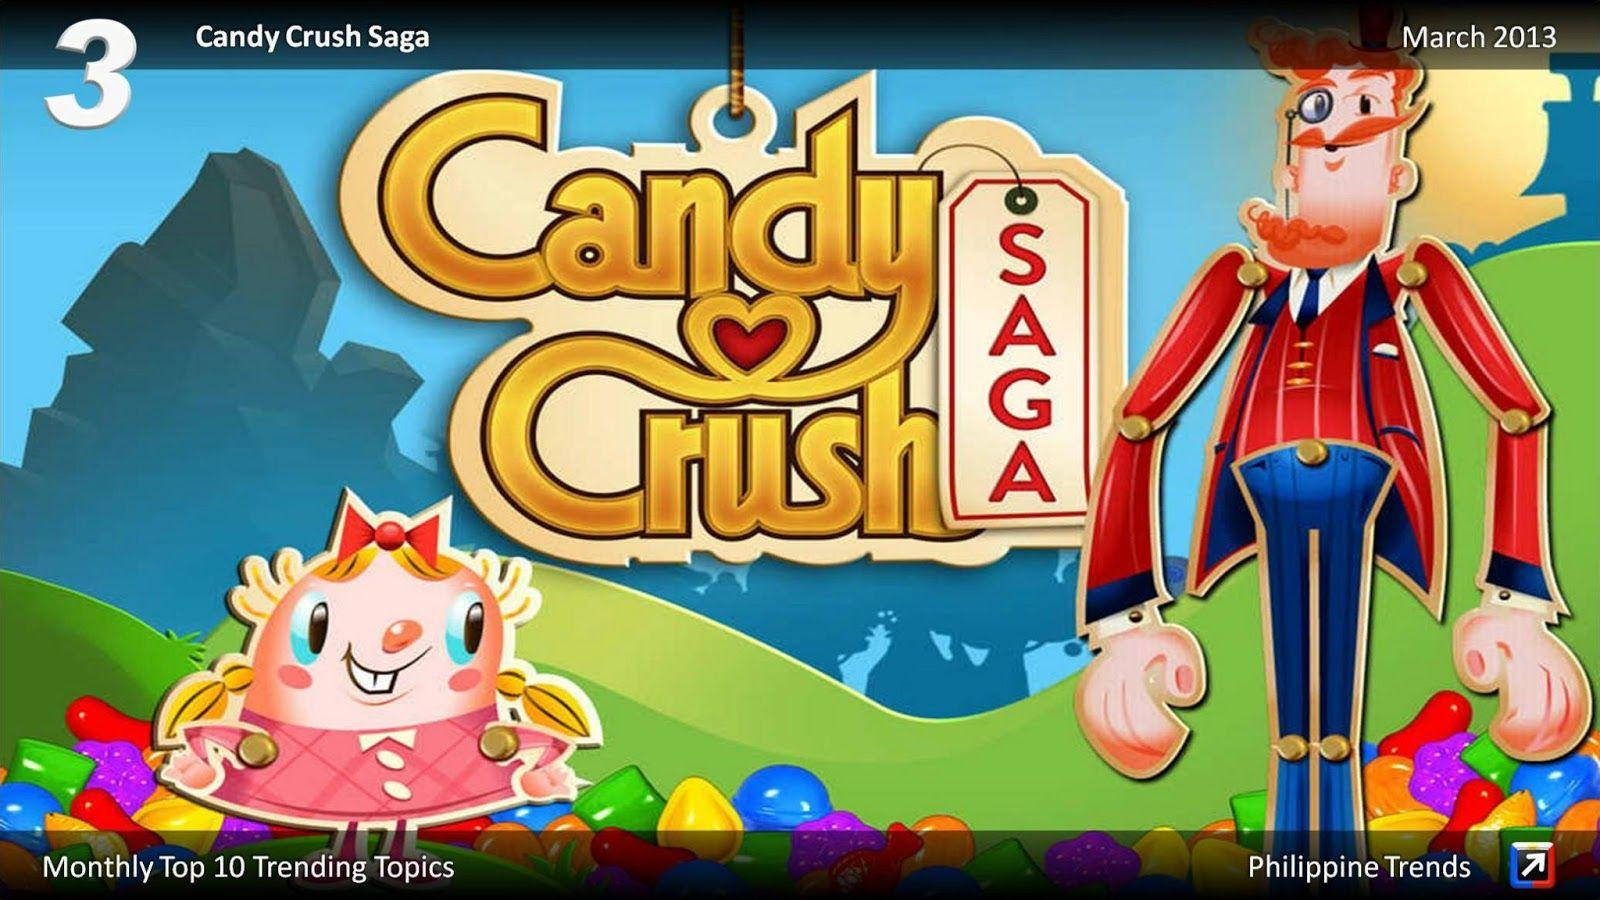 Mr. Toffee and Tiffi's Adventure in Candy Crush Saga Wallpaper